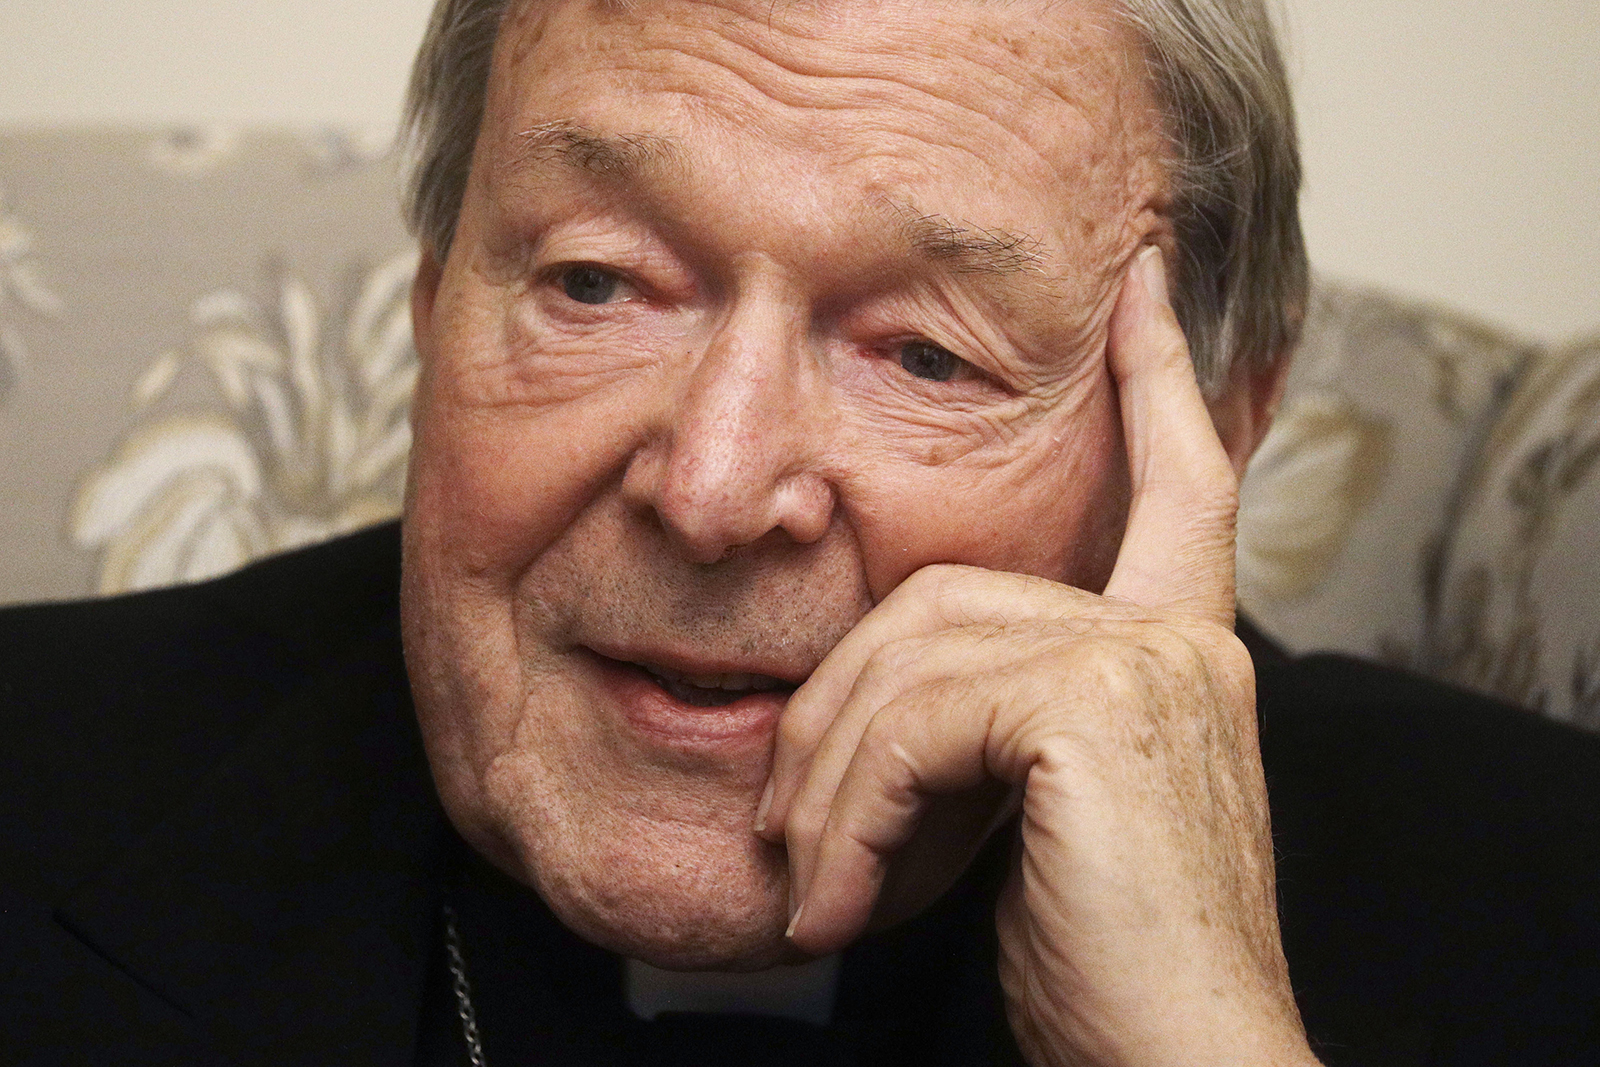 Cardinal George Pell answers a journalist’s question during an interview with The Associated Press inside his residence near the Vatican in Rome on Nov. 30, 2020. The pope’s former treasurer, who was convicted and then acquitted of sexual abuse in his native Australia, said he feels a dismayed sense of vindication as the financial mismanagement he tried to uncover in the Holy See is now being exposed in a spiraling Vatican corruption investigation. (AP Photo/Gregorio Borgia)